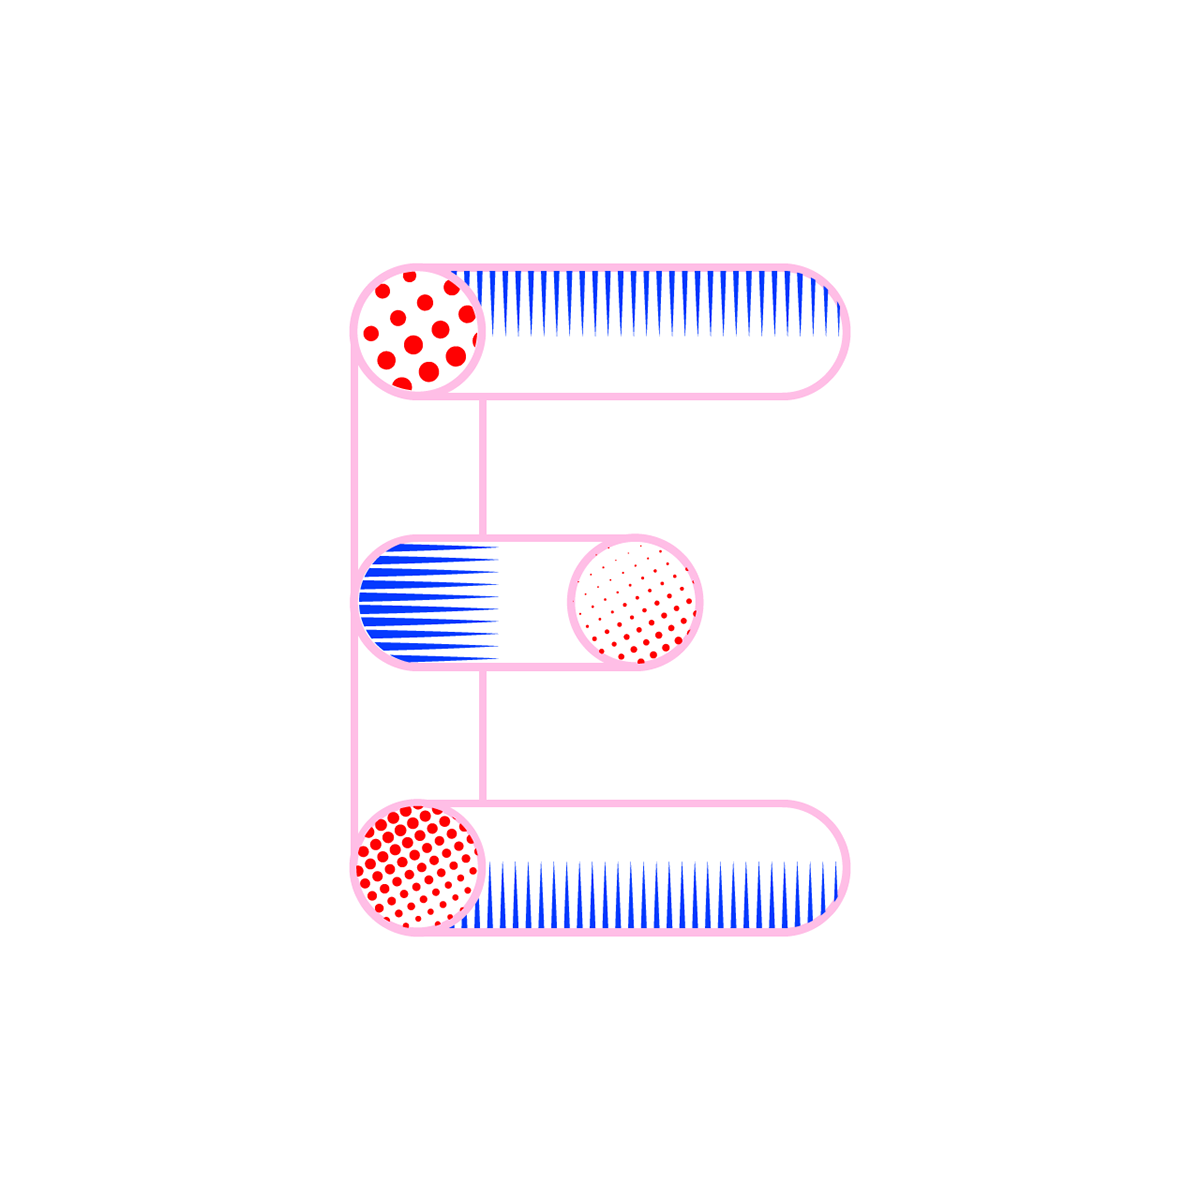 typography   type typedesign graphicdesign 36daysoftype lettering